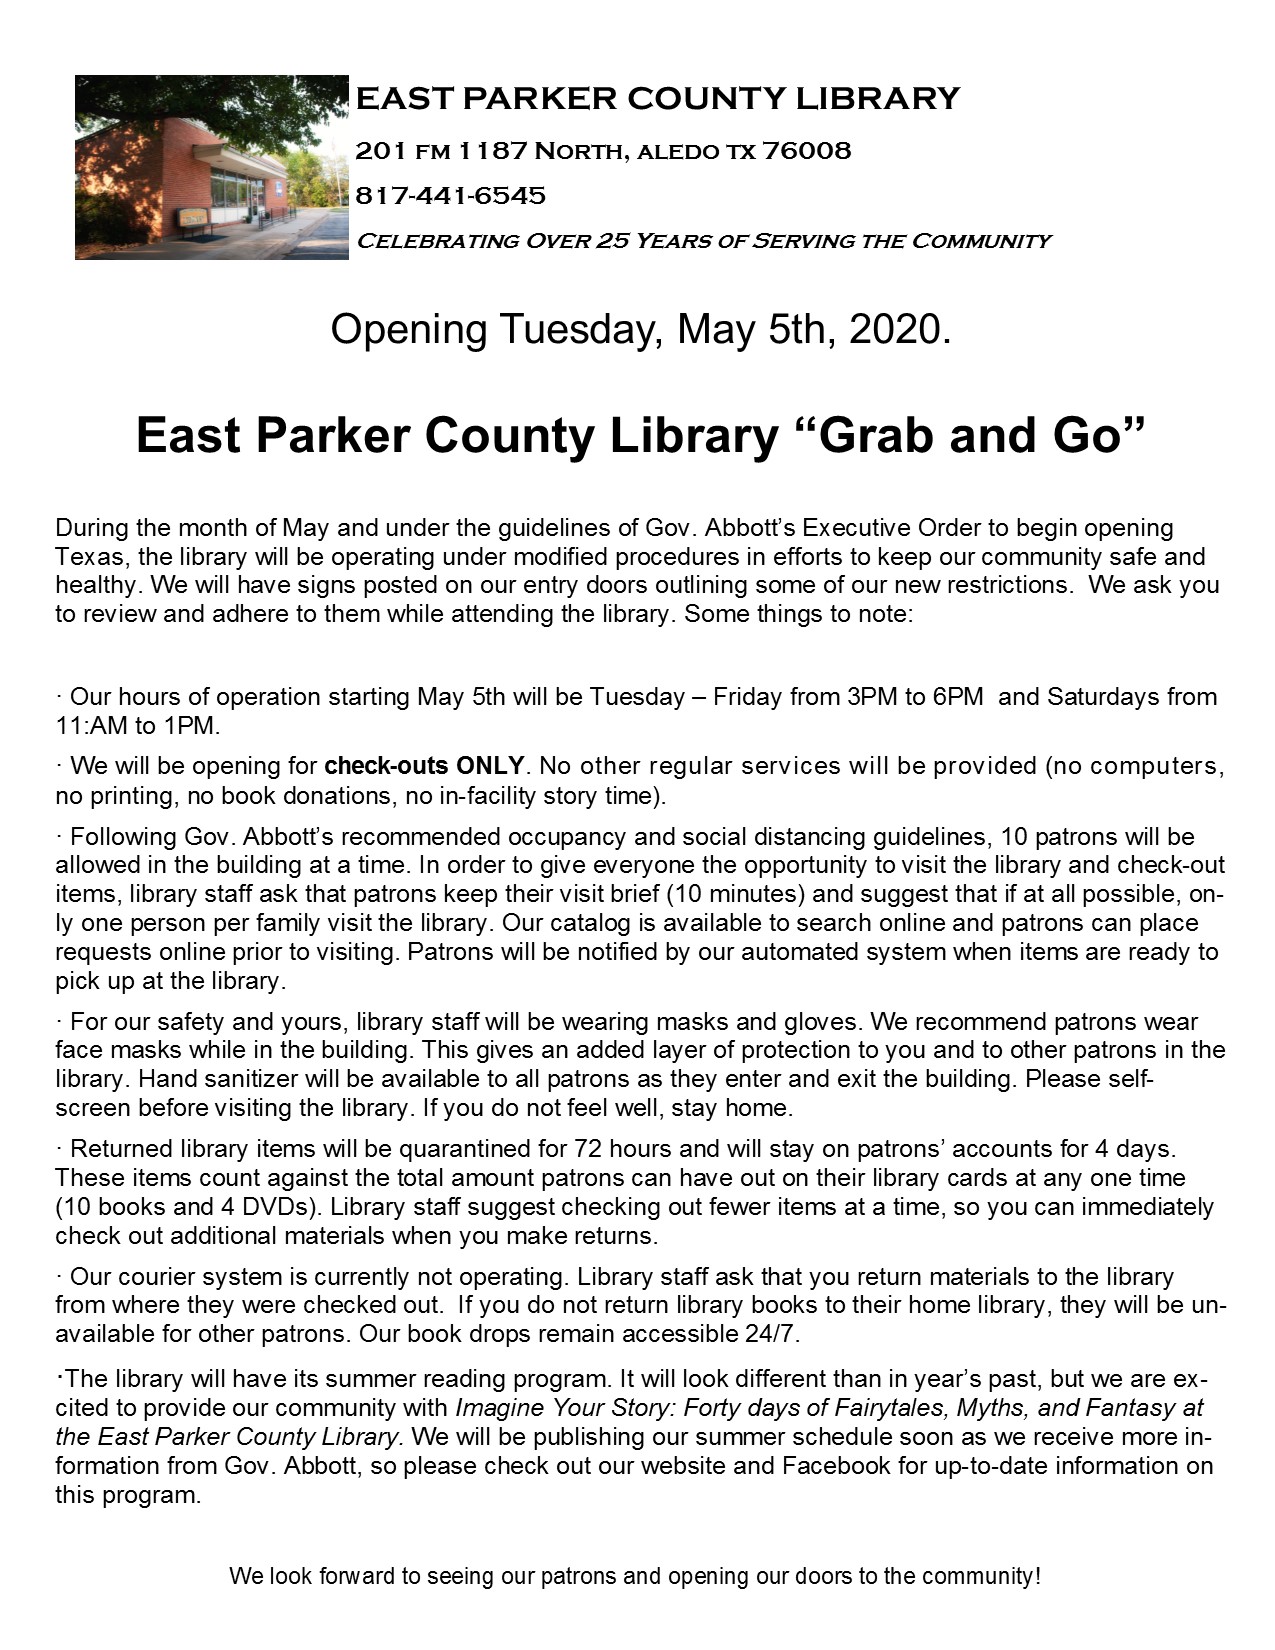 Library opening in May 2020.jpg